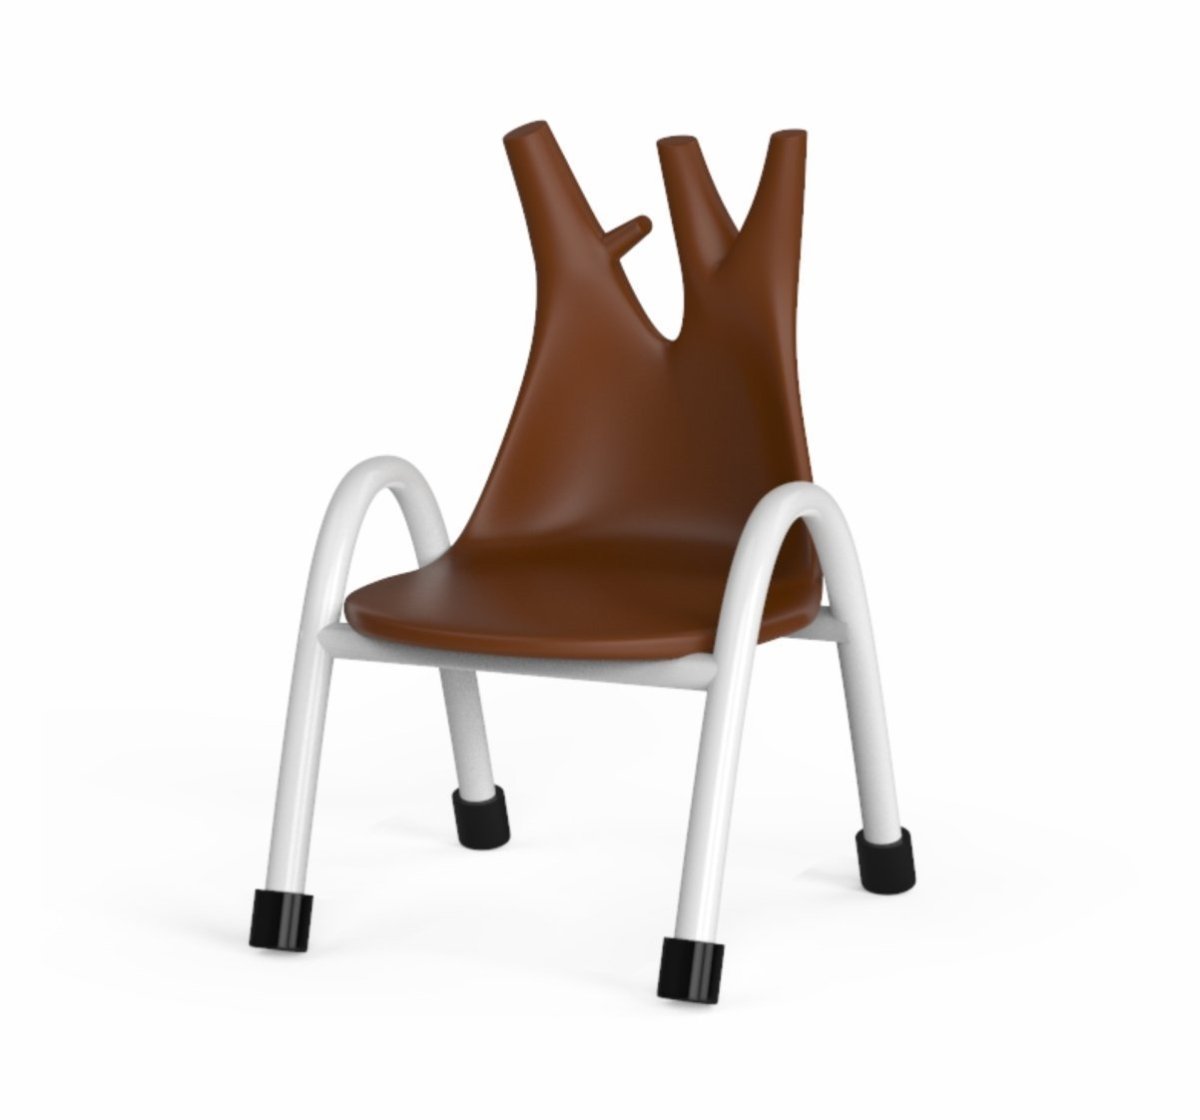 OK Play Trunk Chair- Brown - FTFF000423